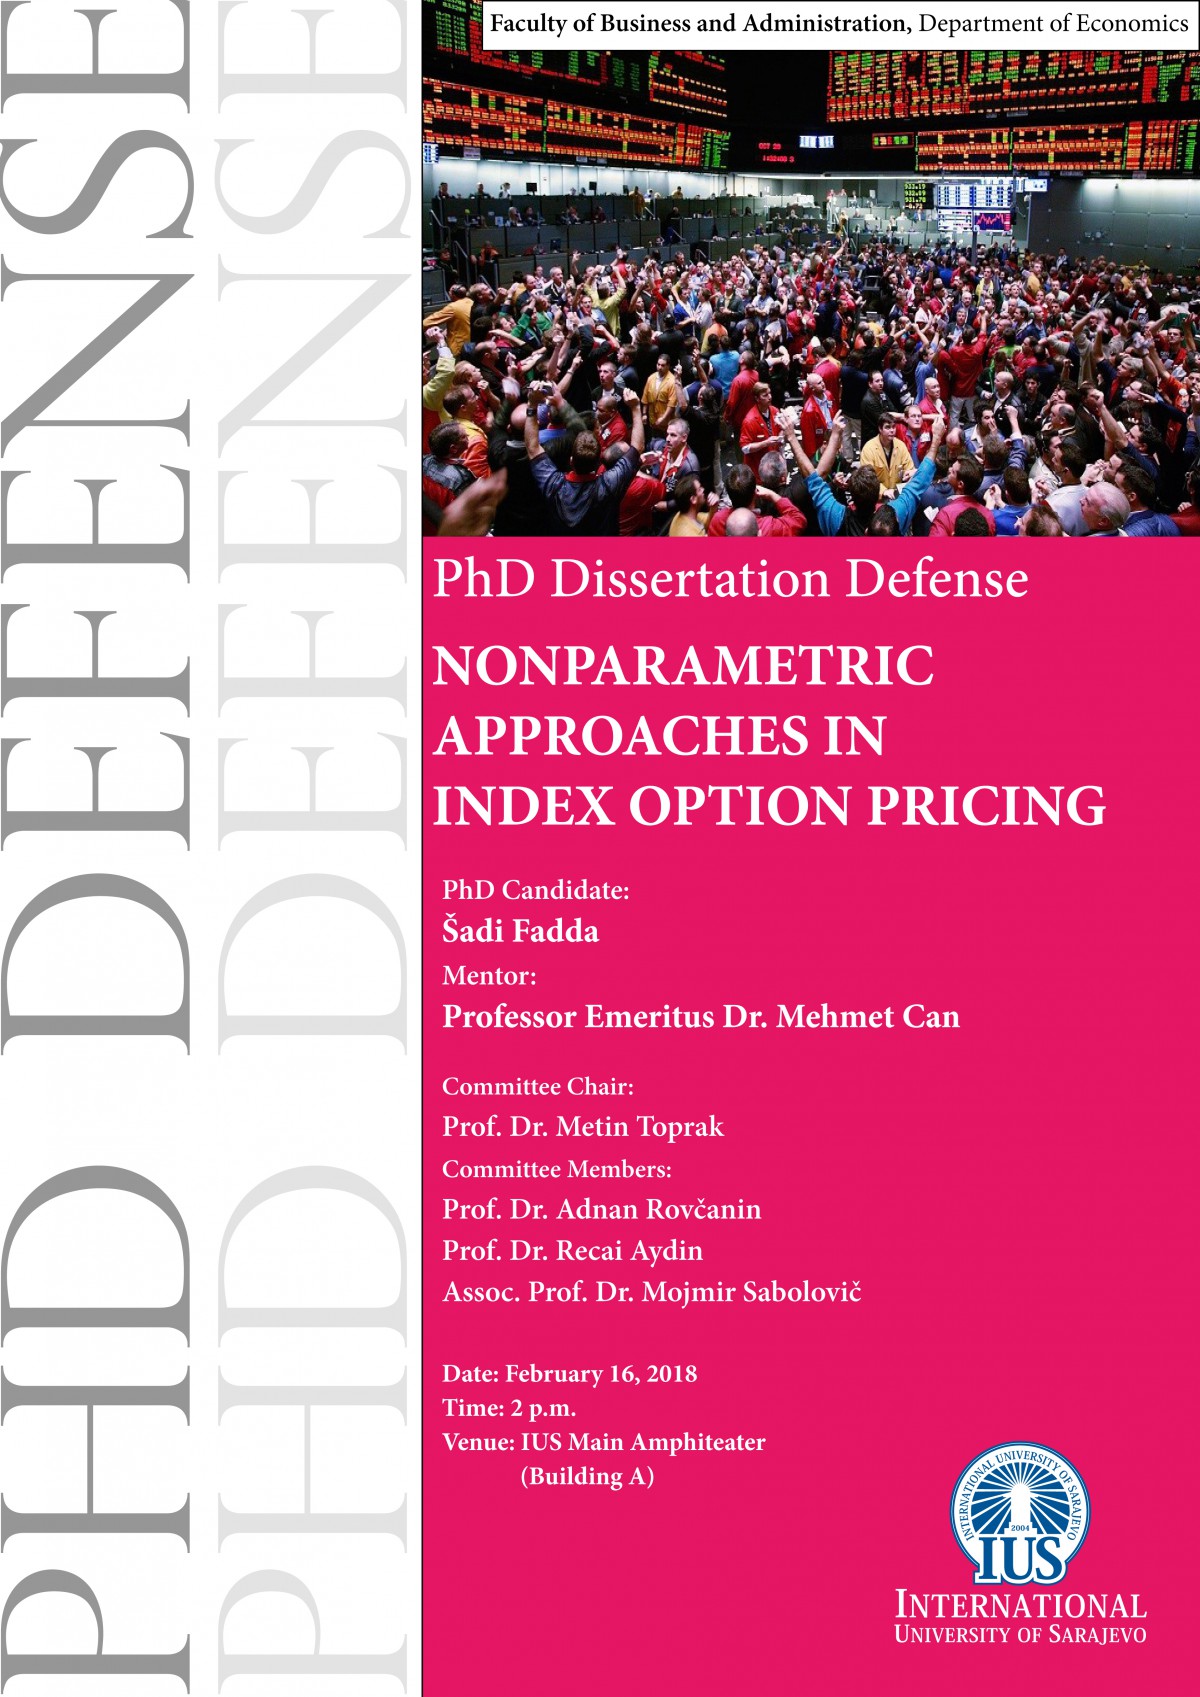  Nonparametric Approaches In Index Option Pricing 